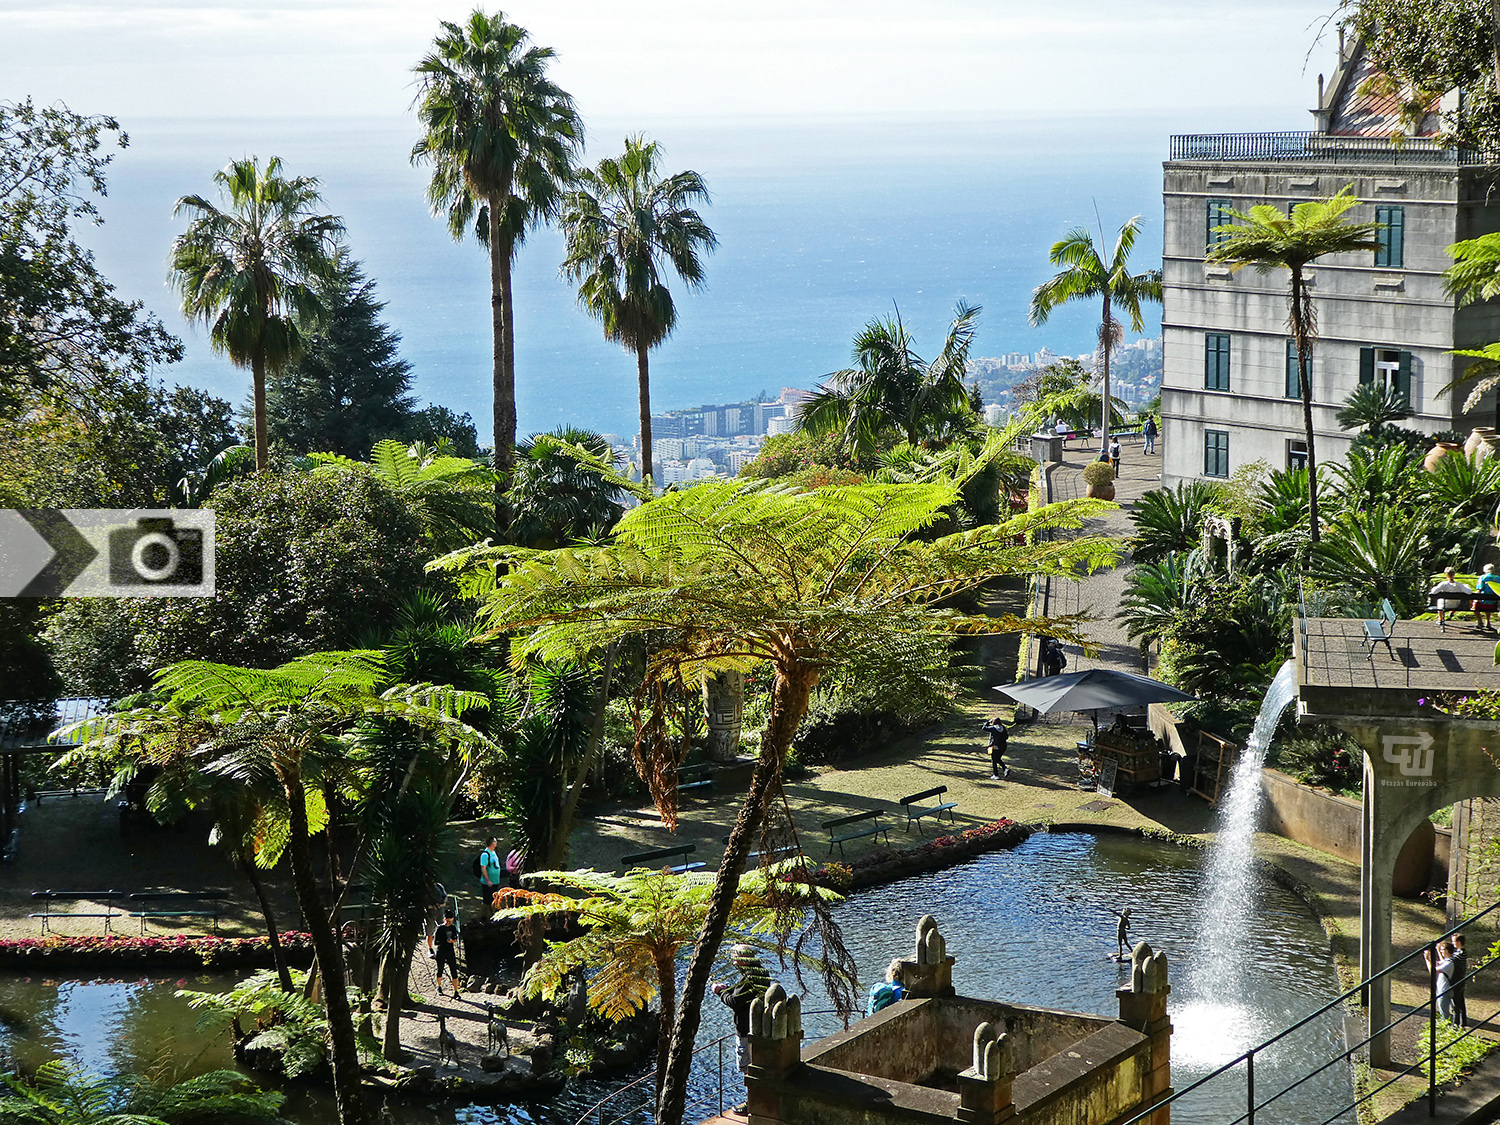 02_monte_palace_tropical_gardens_funchal.JPG